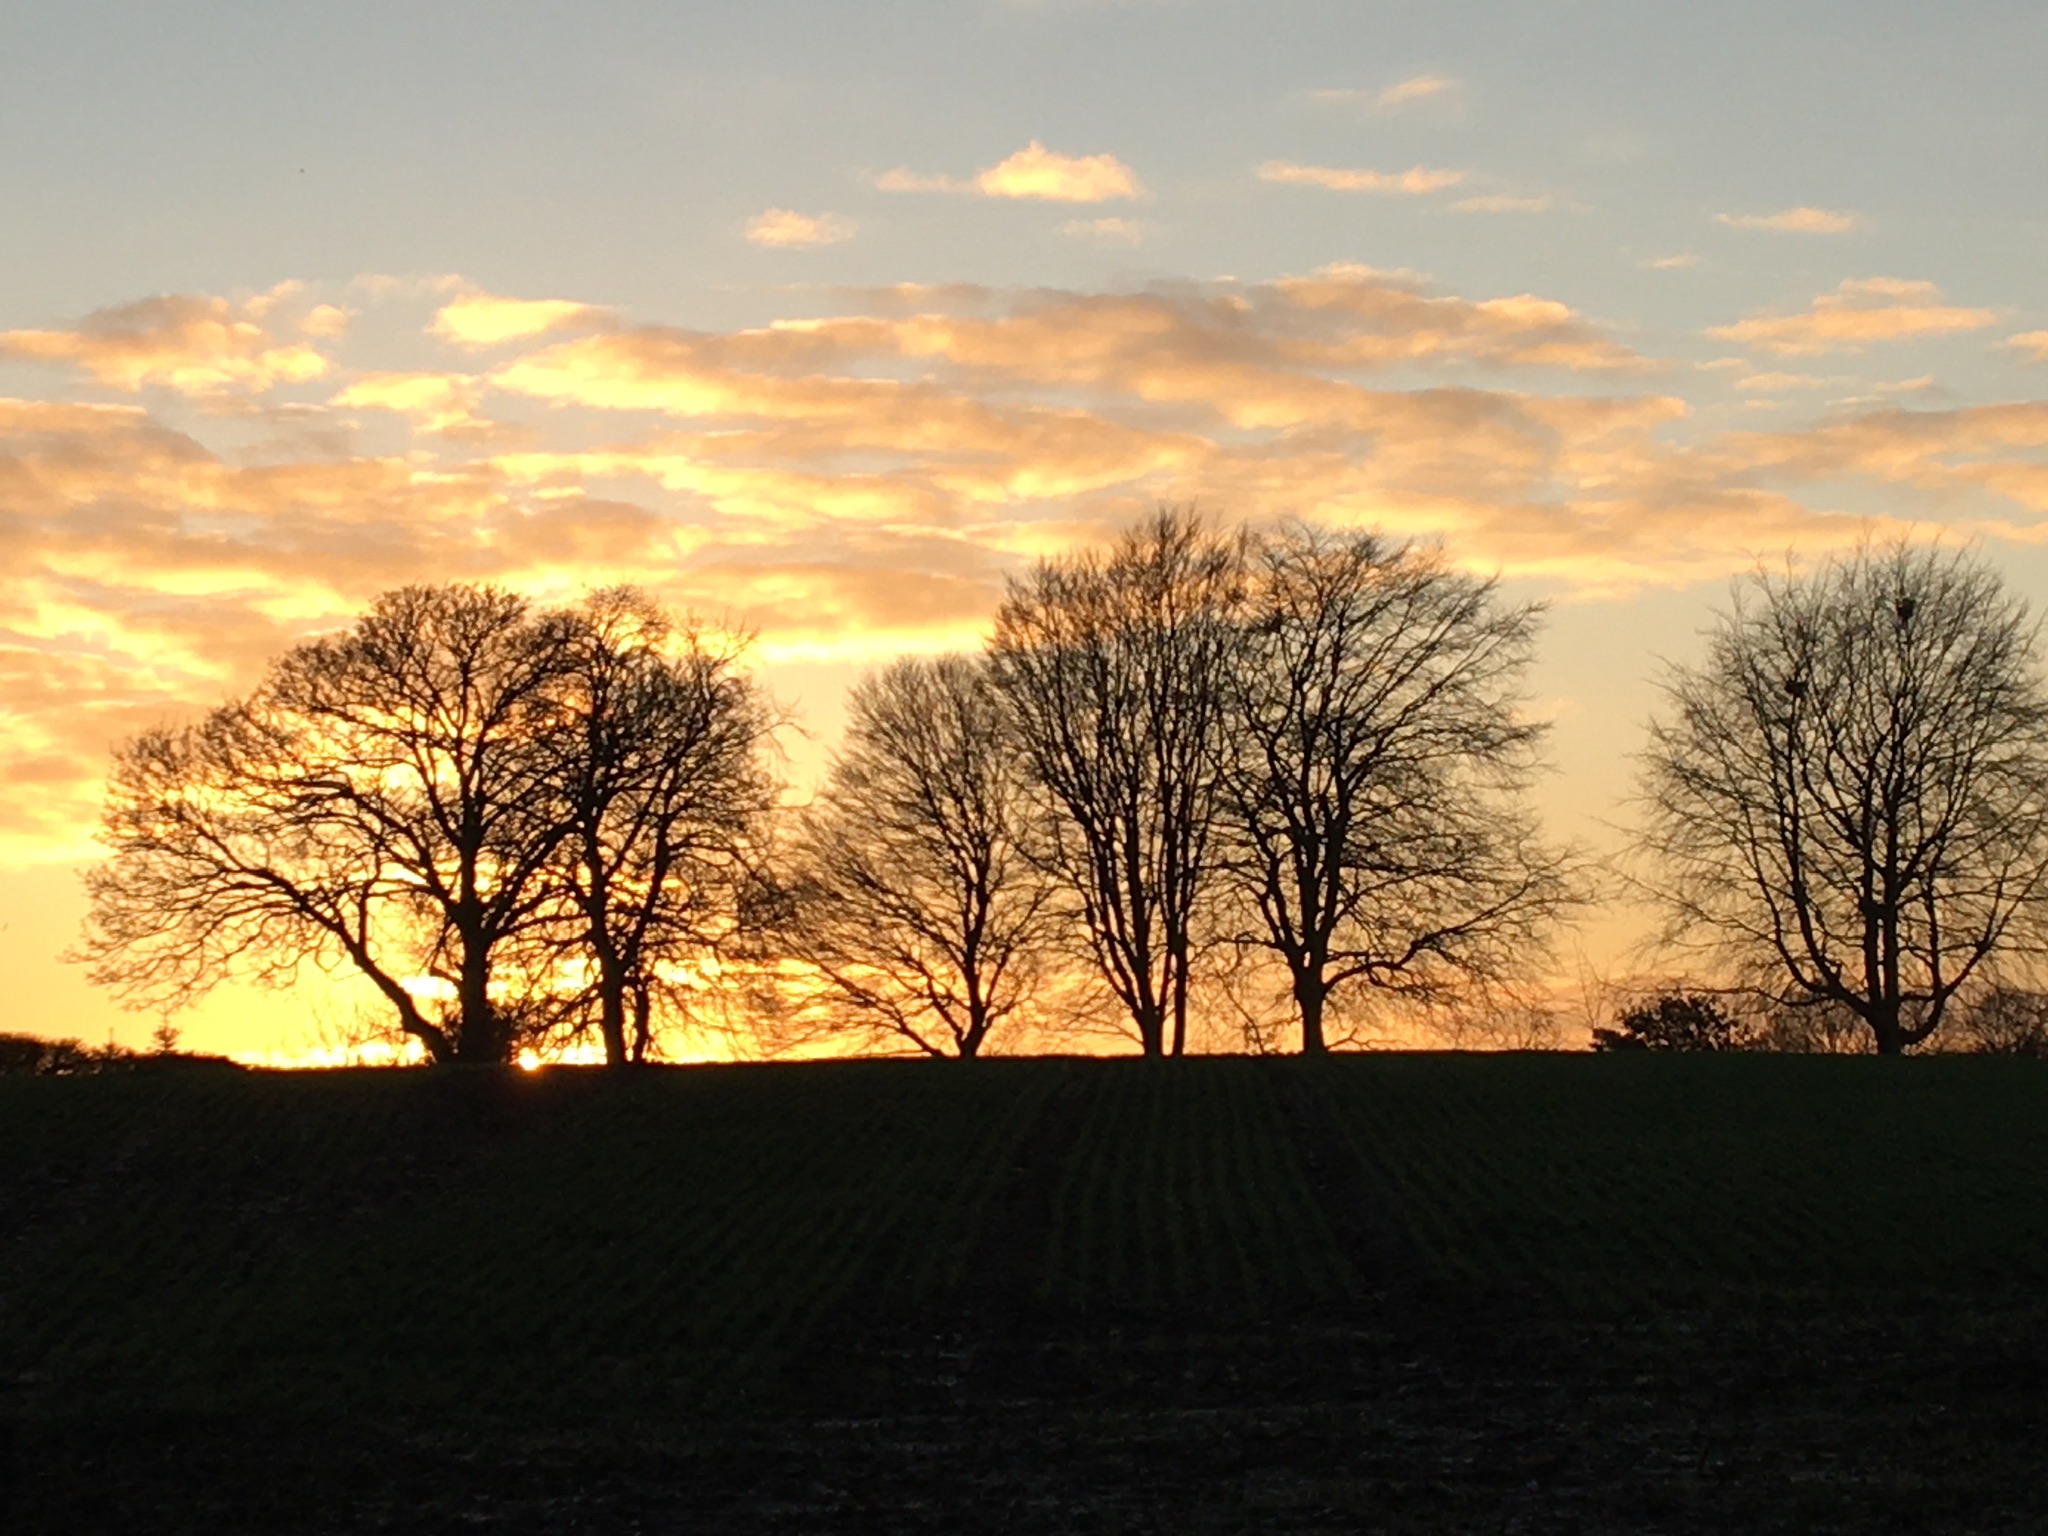 Sunset from the South Cheshire Way, photo by Kim J. january 6th